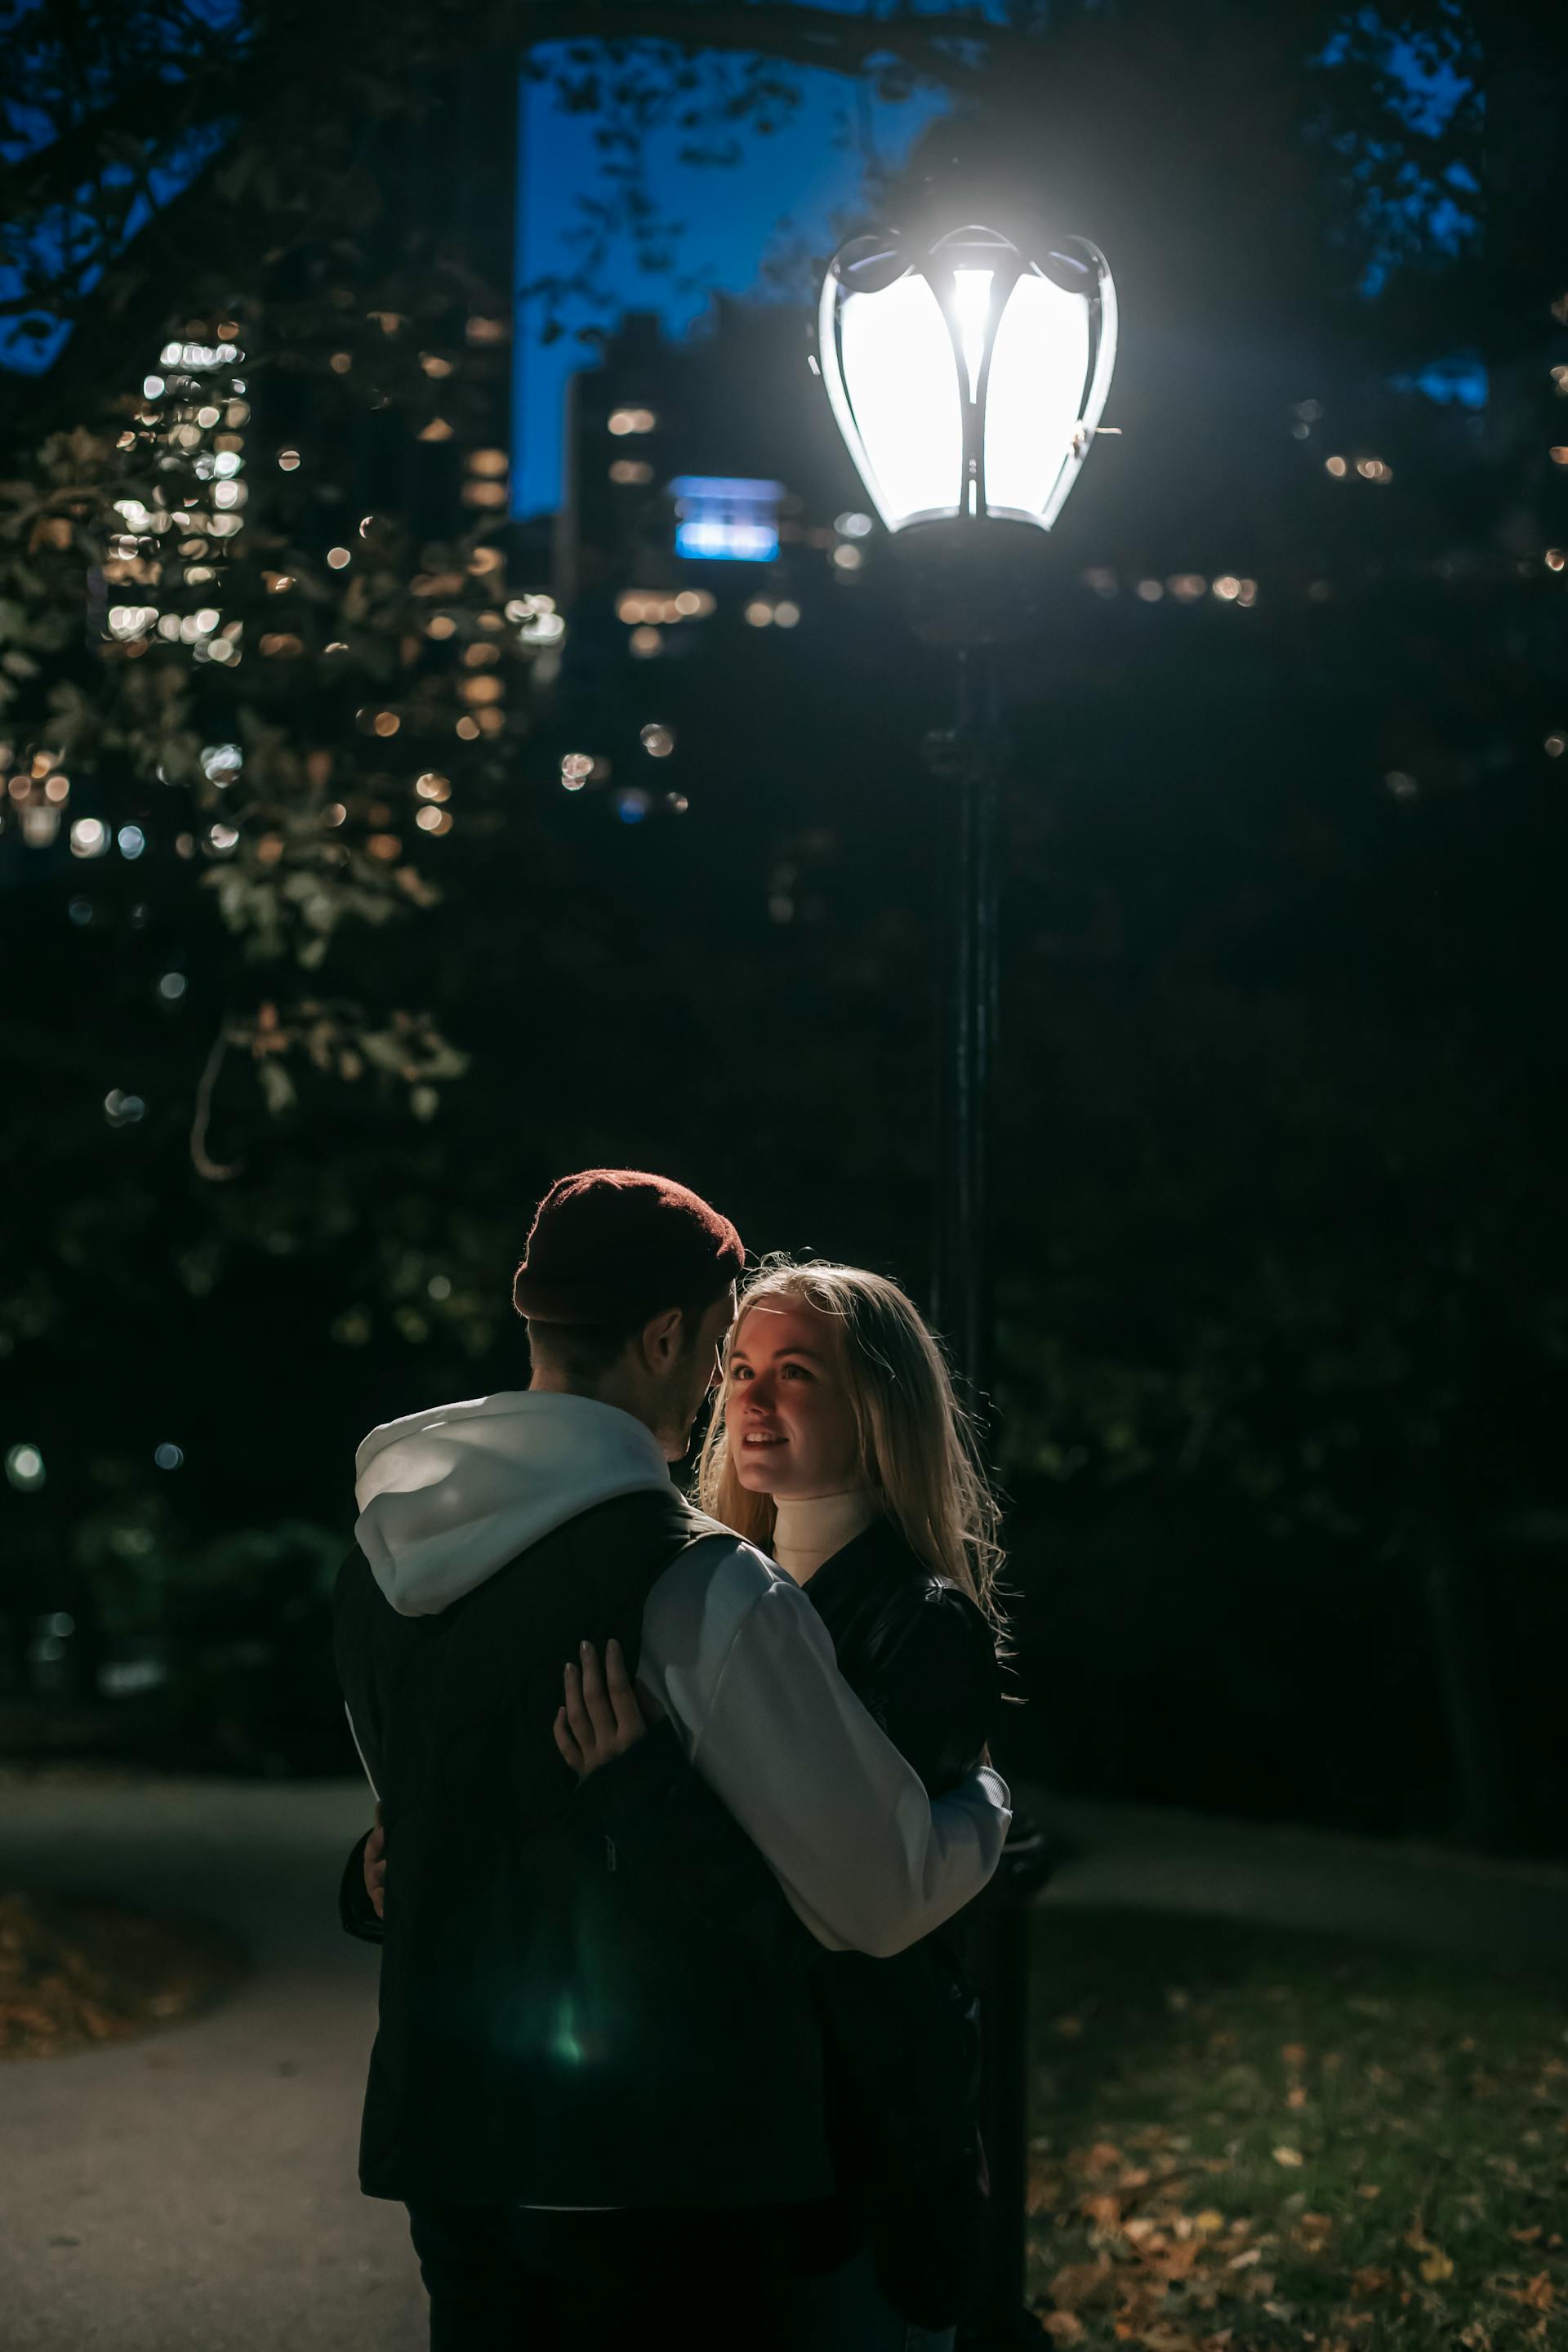 A couple standing under a street lamp | Source: Pexels